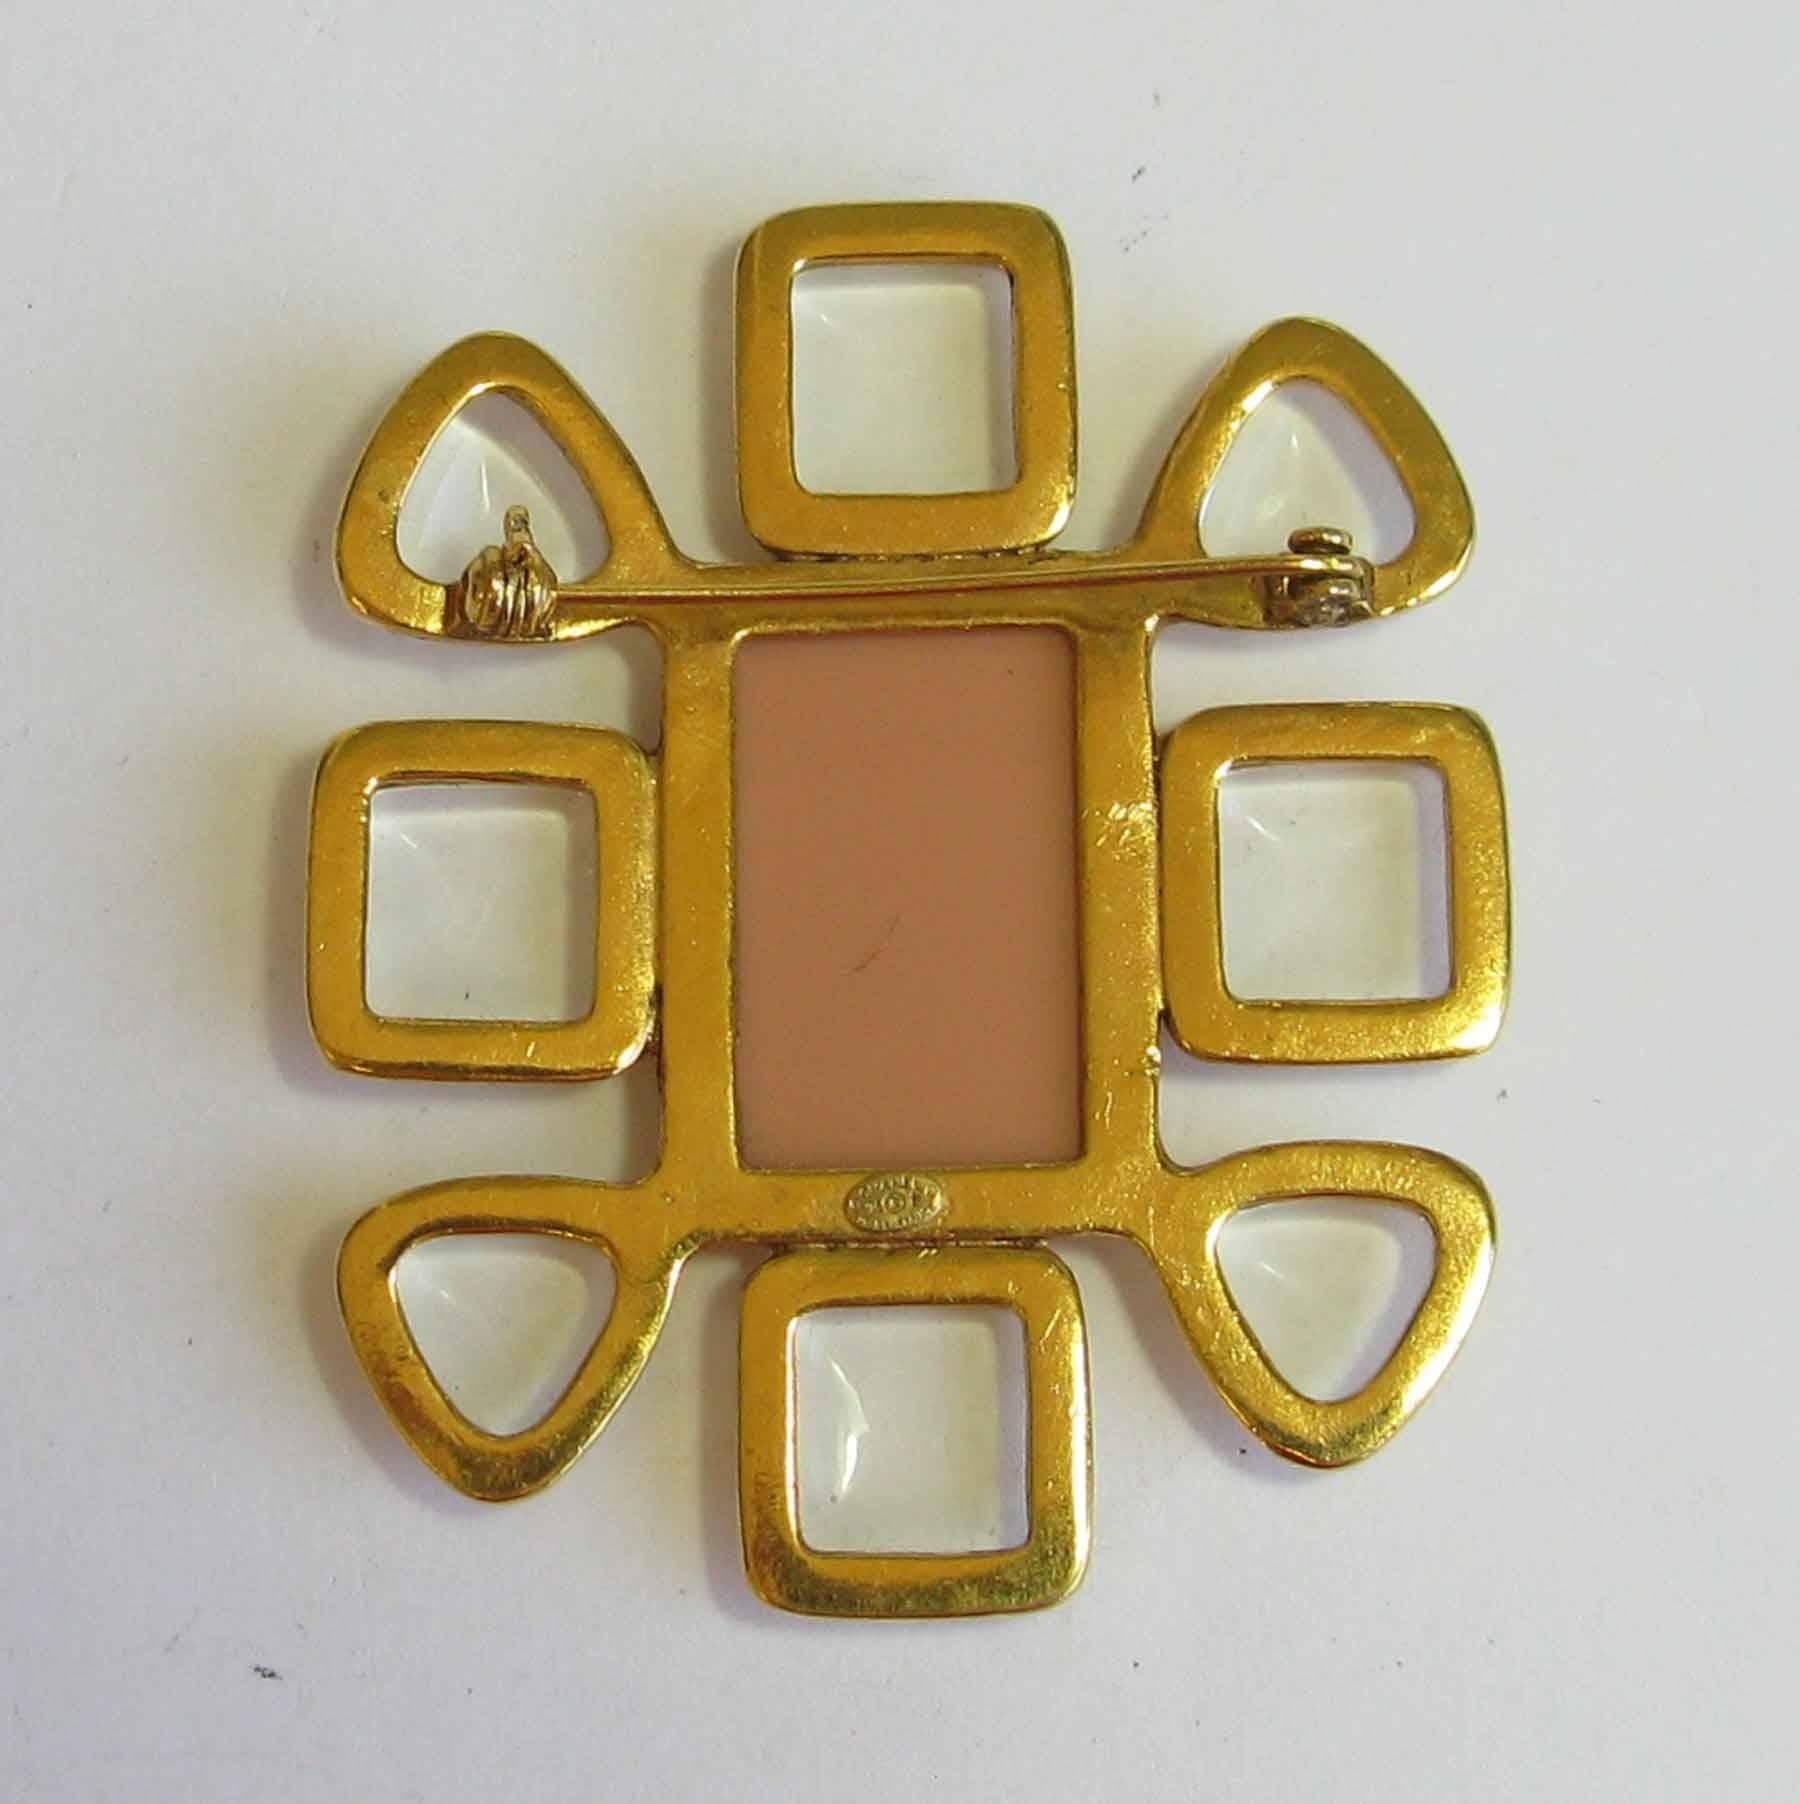 Women's CHANEL Brooch in Gilt Metal, Transparent Molten Glass and Salmon Colored Resin